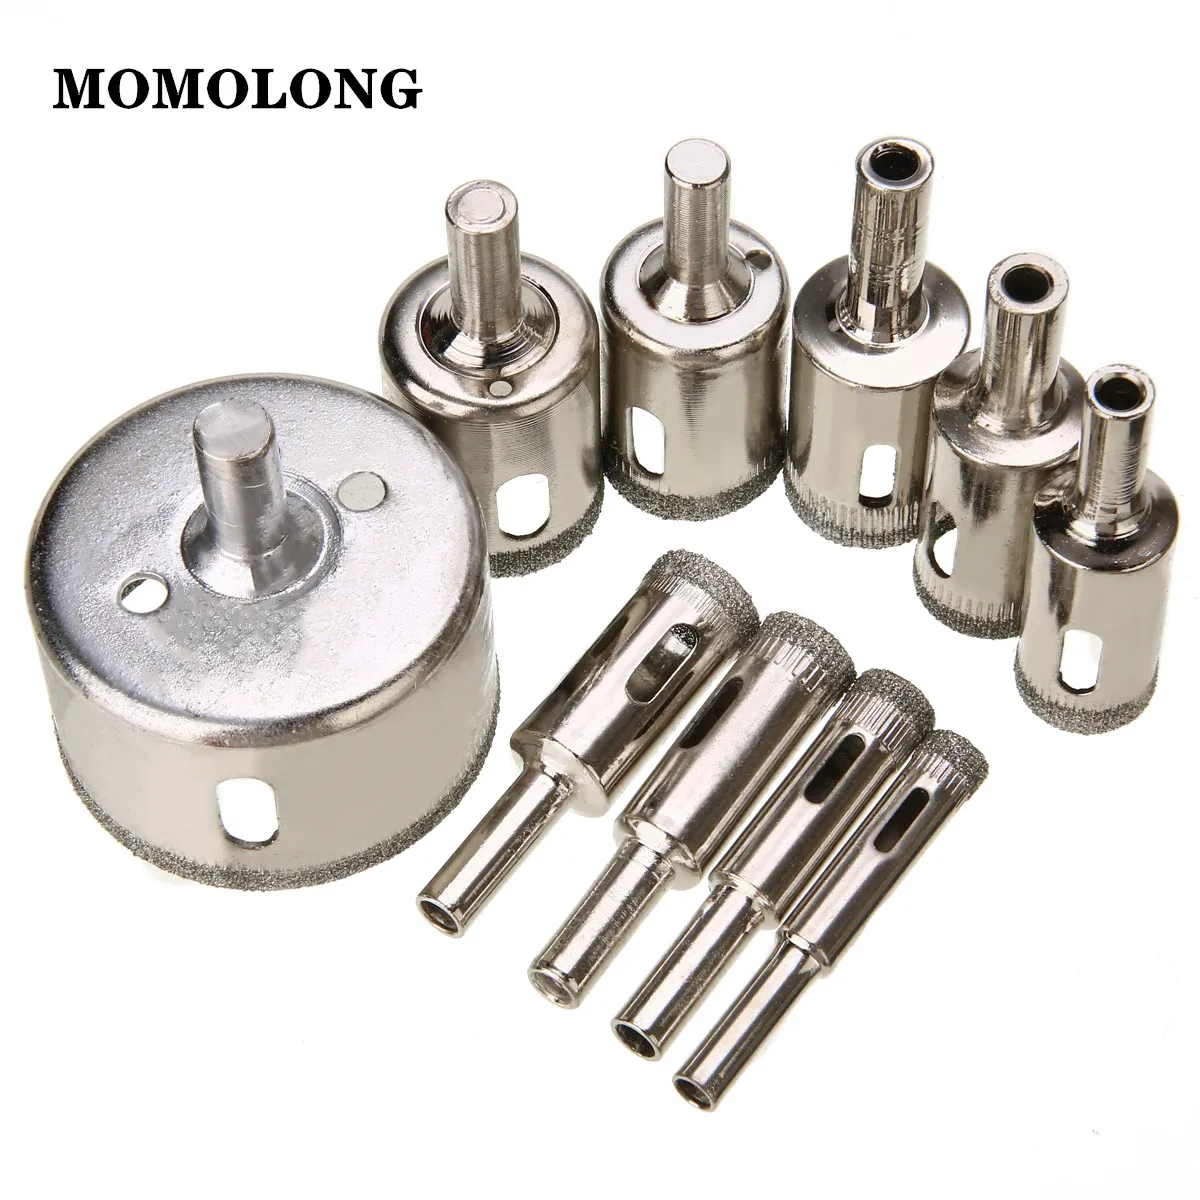 10/15/30Pcs Diamond Coated Drill Bit  Glass Ceramic Hole Saw  3-50mm Drilling Bits For Tile Marble Glass Ceramic For Power Tools 10 15 30pcs diamond coated drill bit glass ceramic hole saw 3 50mm drilling bits for tile marble glass ceramic for power tools